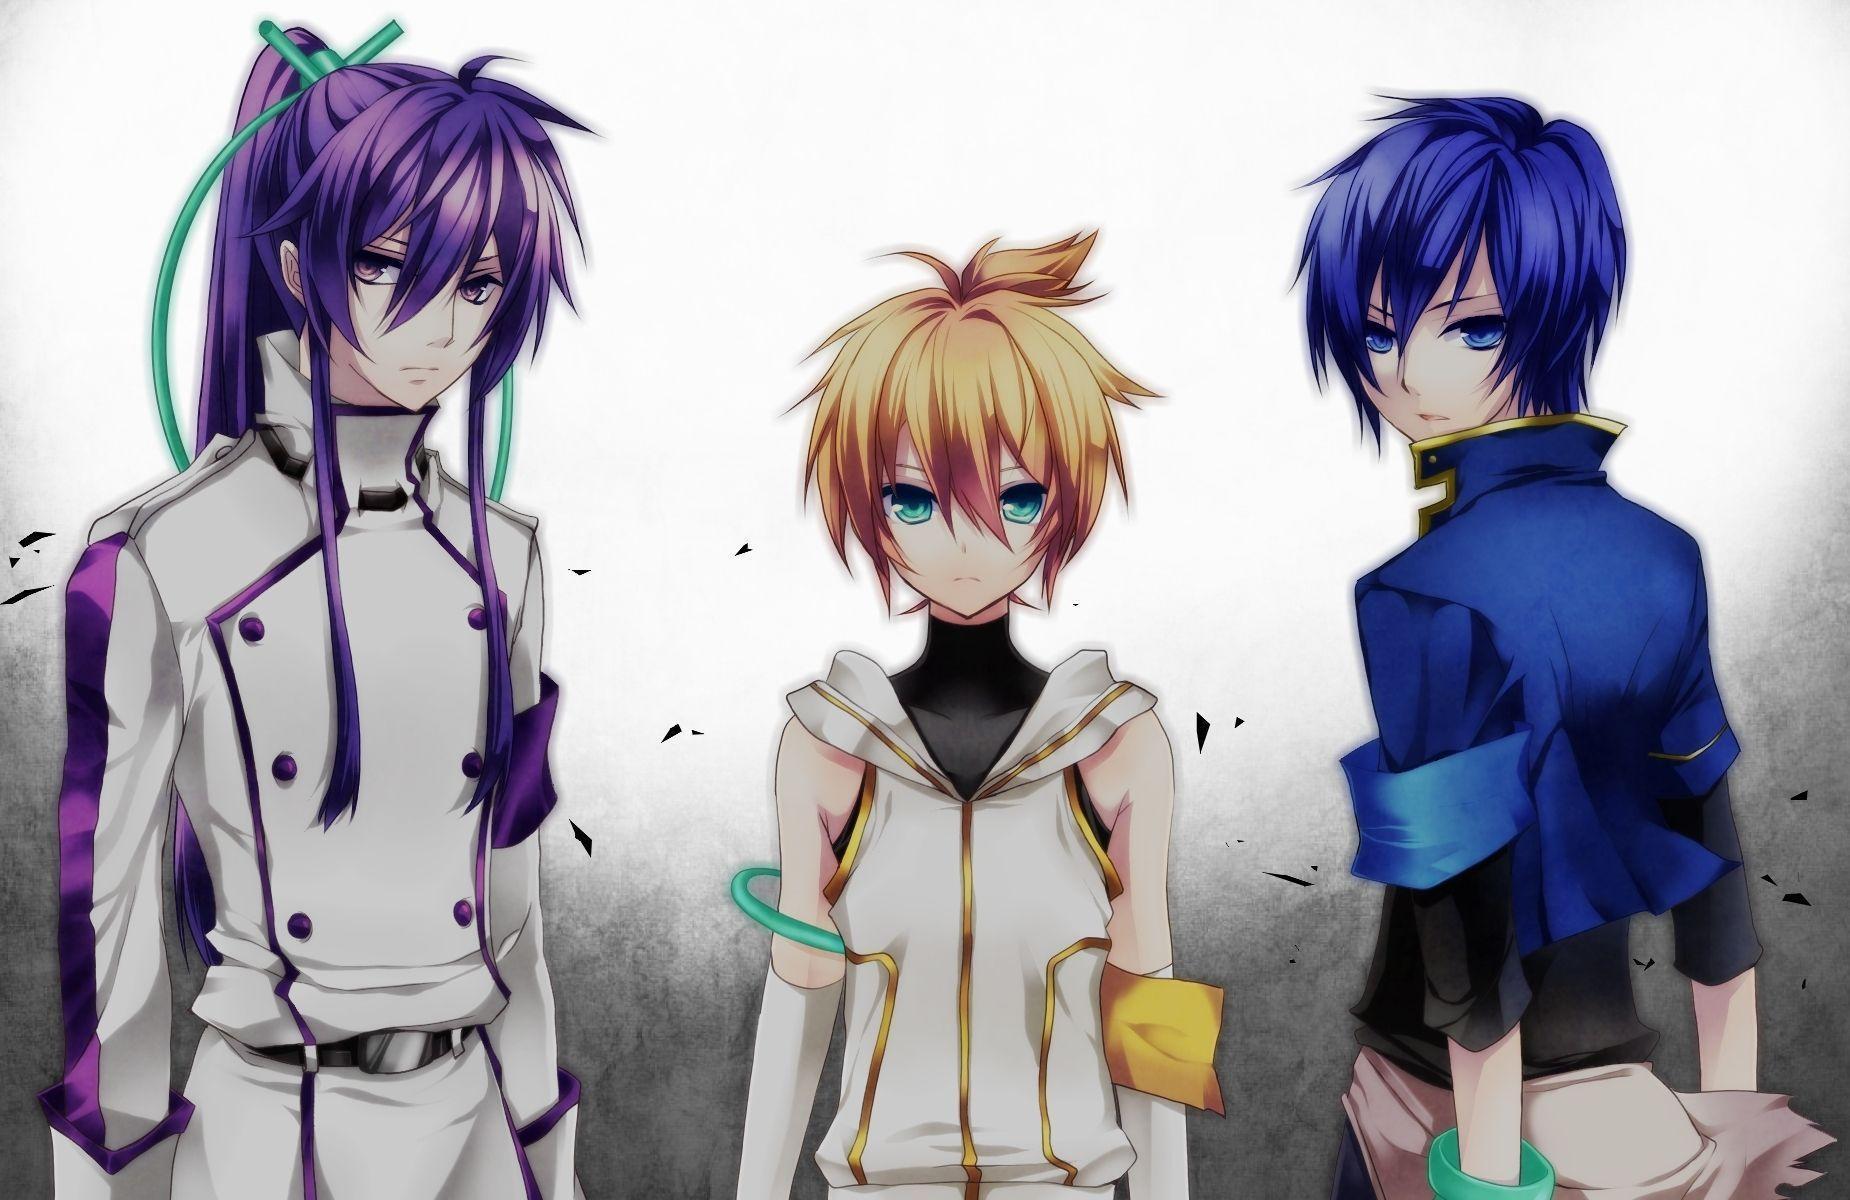 Vocaloid Kaito And Gakupo Image & Picture